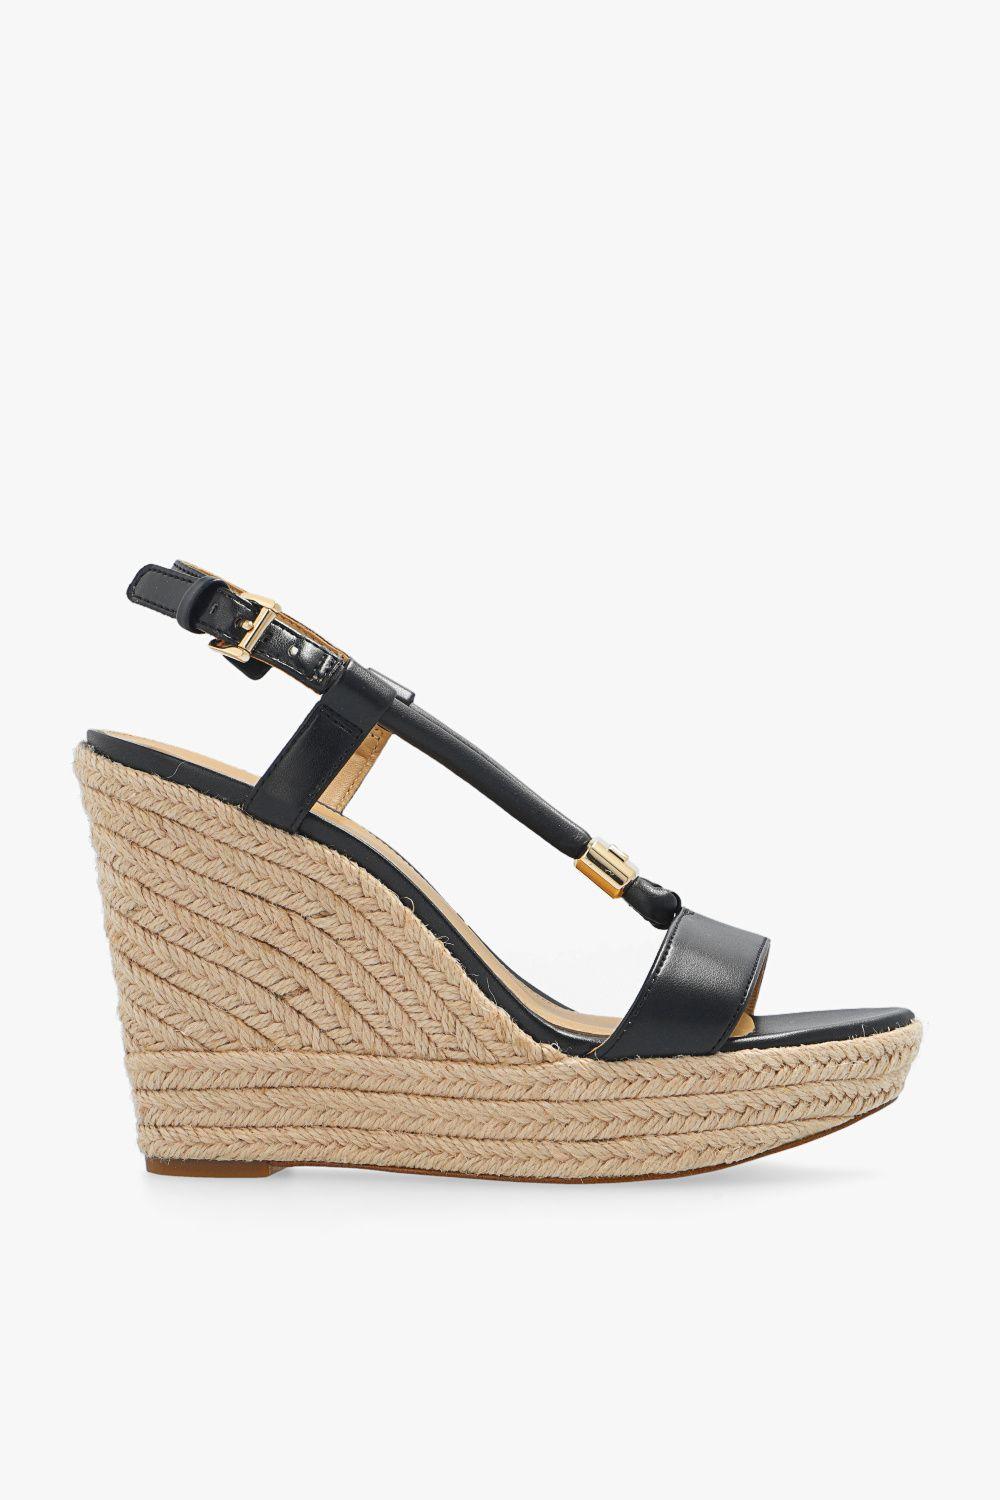 MICHAEL Michael Kors 'annie' Wedge Sandals in Natural | Lyst